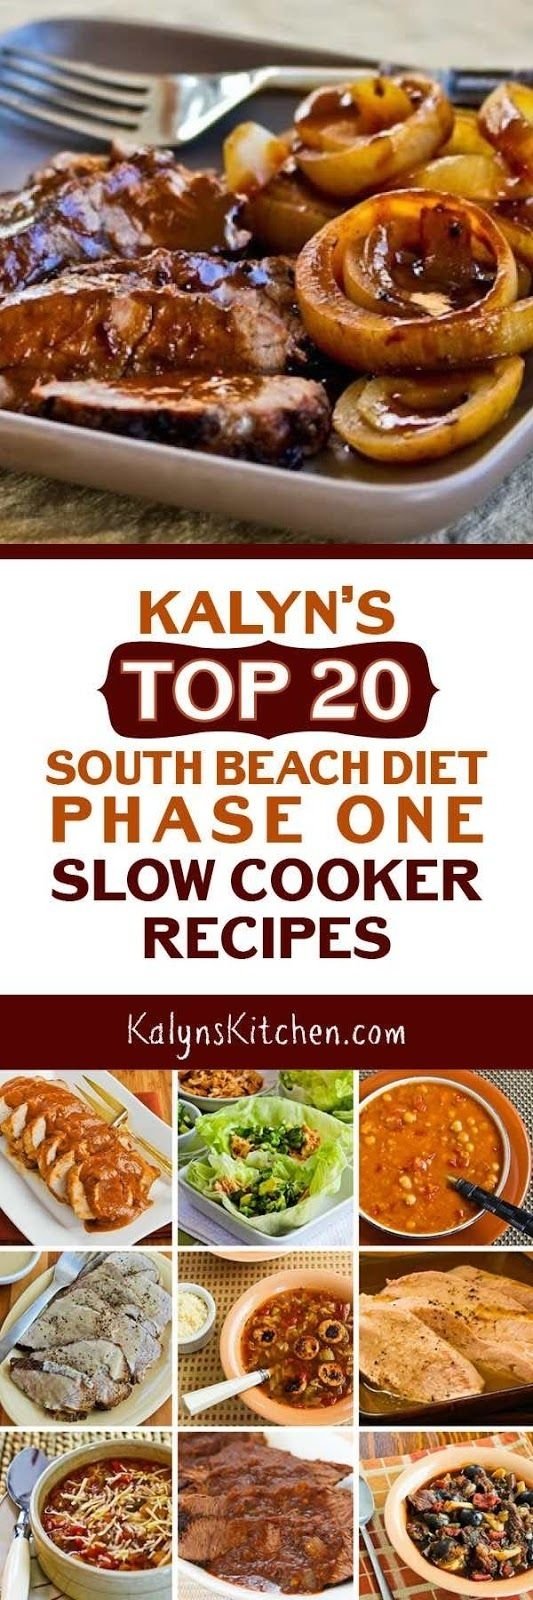 10 Attractive South Beach Diet Lunch Ideas kalyns top 20 south beach diet phase one slow cooker recipes 2022